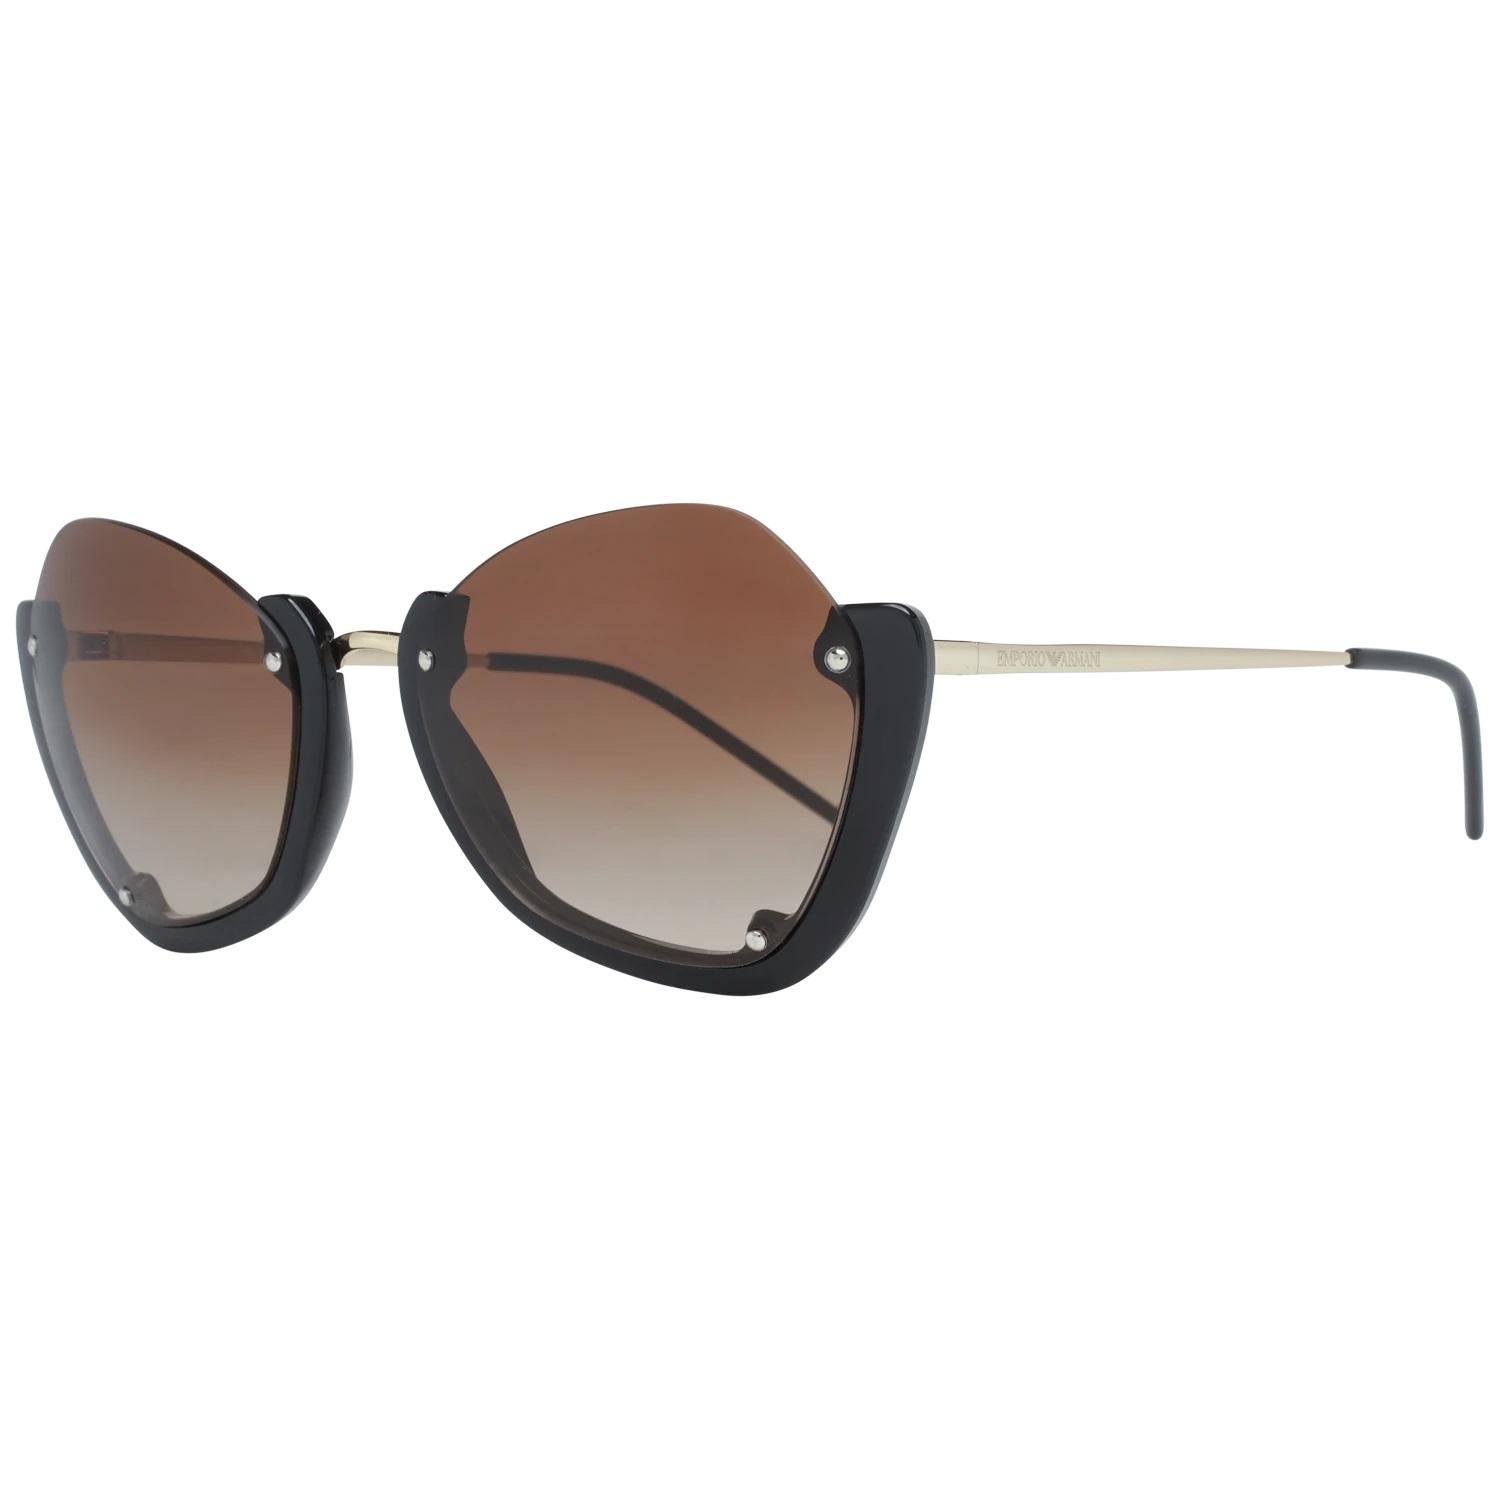 Details

MATERIAL: Metal

COLOR: Black

MODEL: EA4120 50171355

GENDER: Women

COUNTRY OF MANUFACTURE: Italy

TYPE: Sunglasses

ORIGINAL CASE?: Yes

STYLE: Butterfly

OCCASION: Casual

FEATURES: Lightweight

LENS COLOR: Brown

LENS TECHNOLOGY: